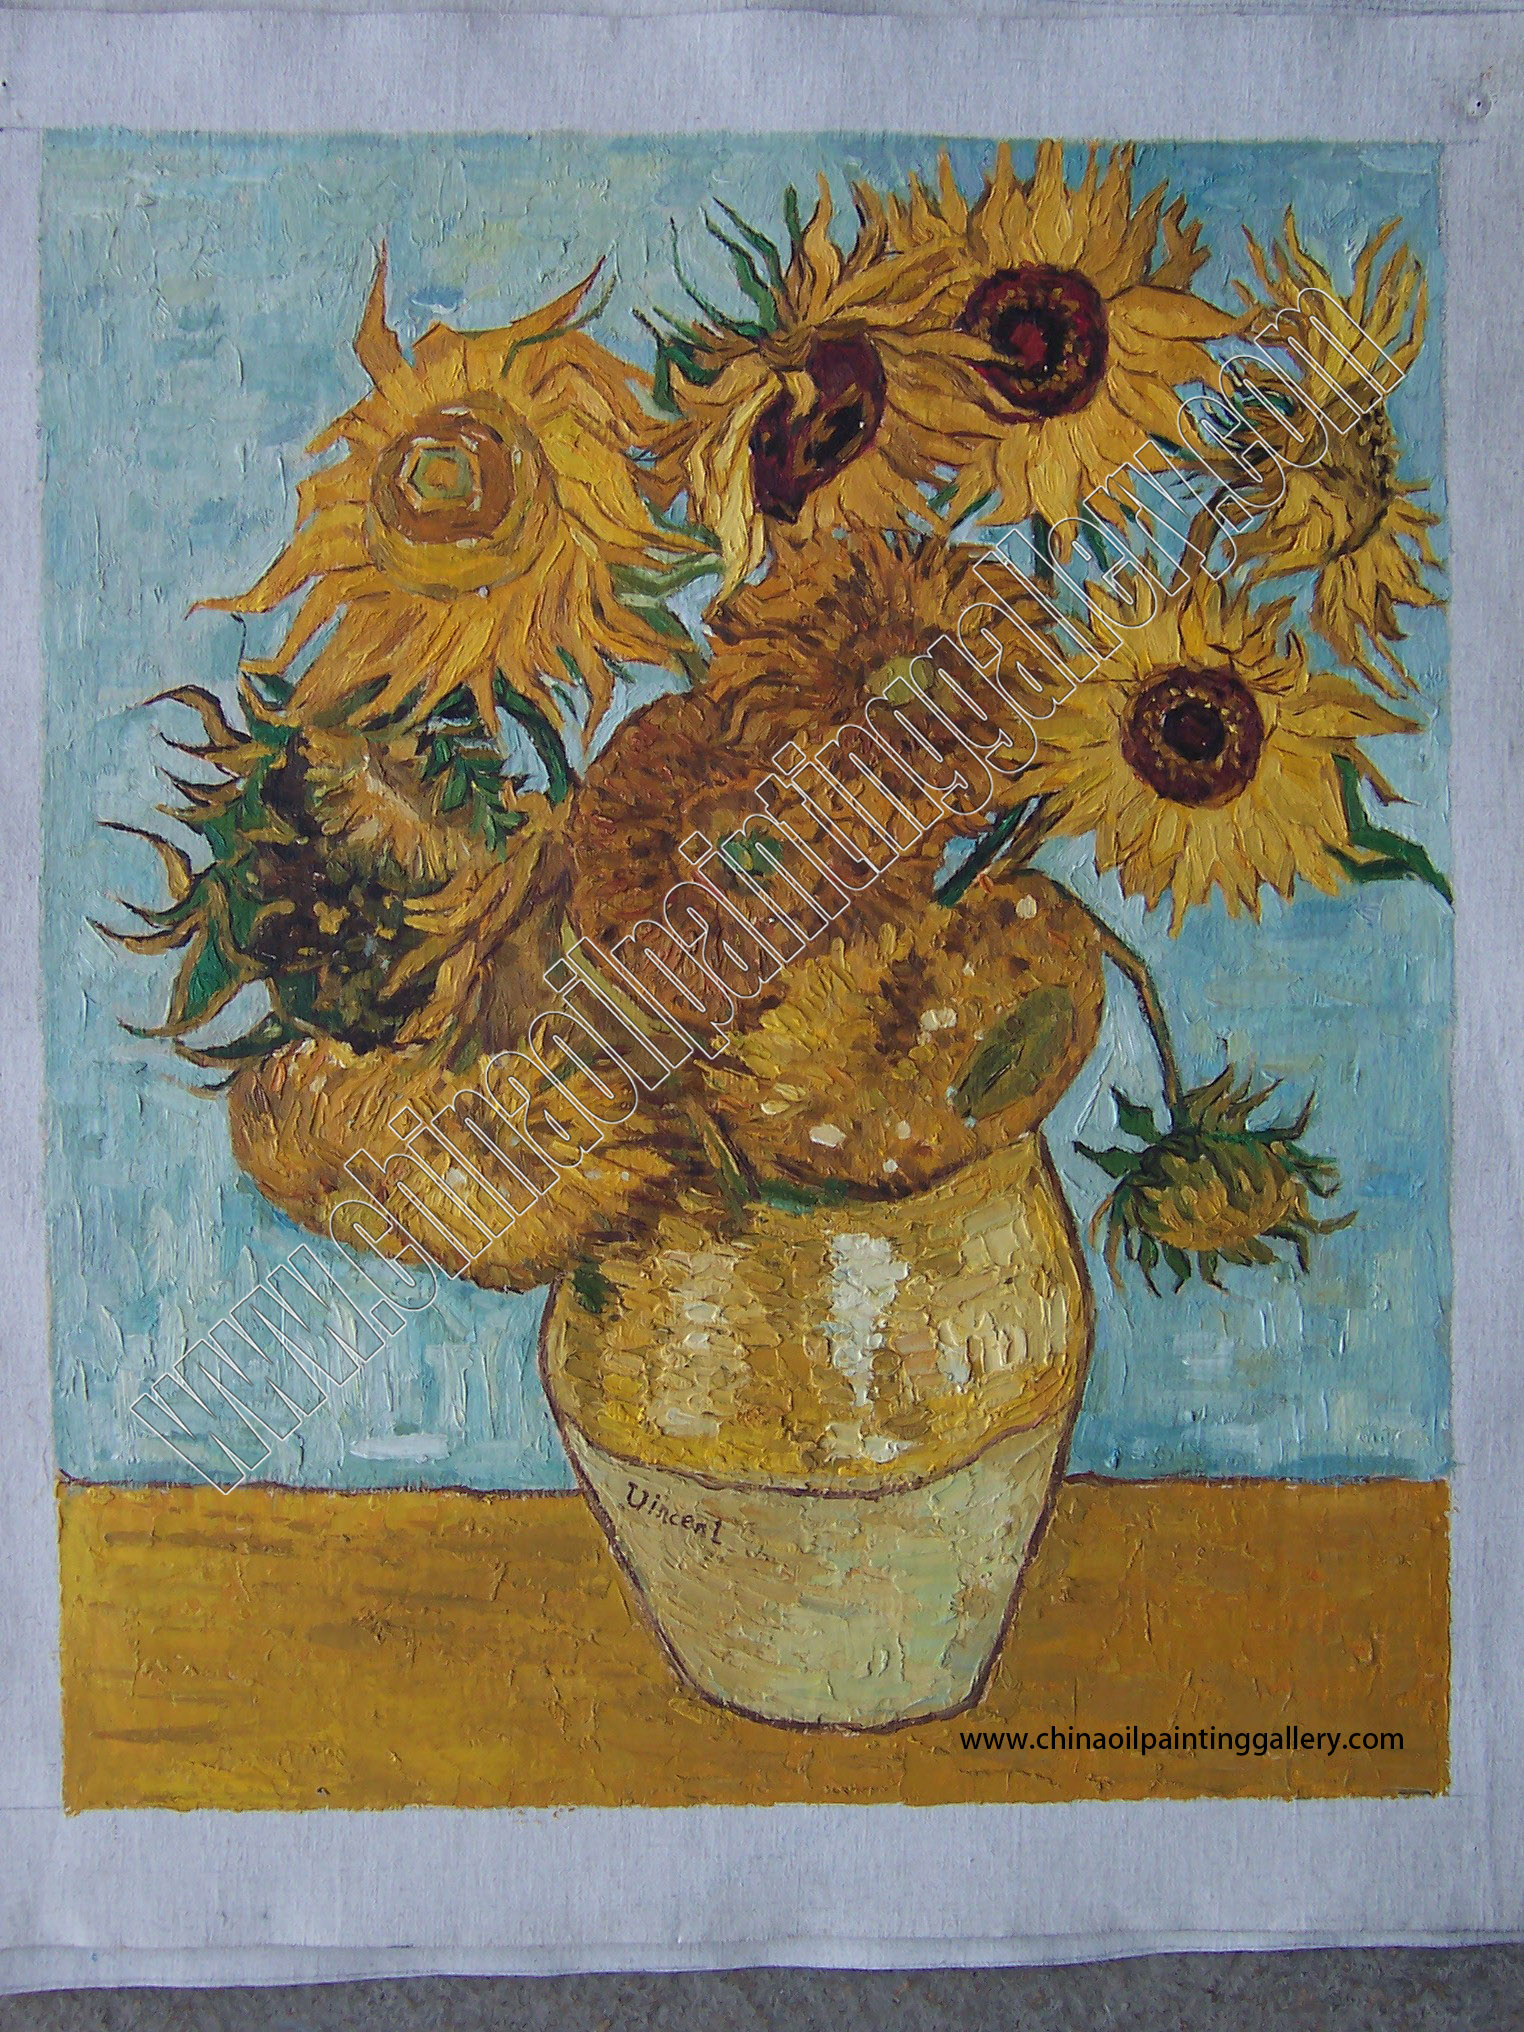 Vincent van Gogh Sunflowers - Oil painting reproductions 16